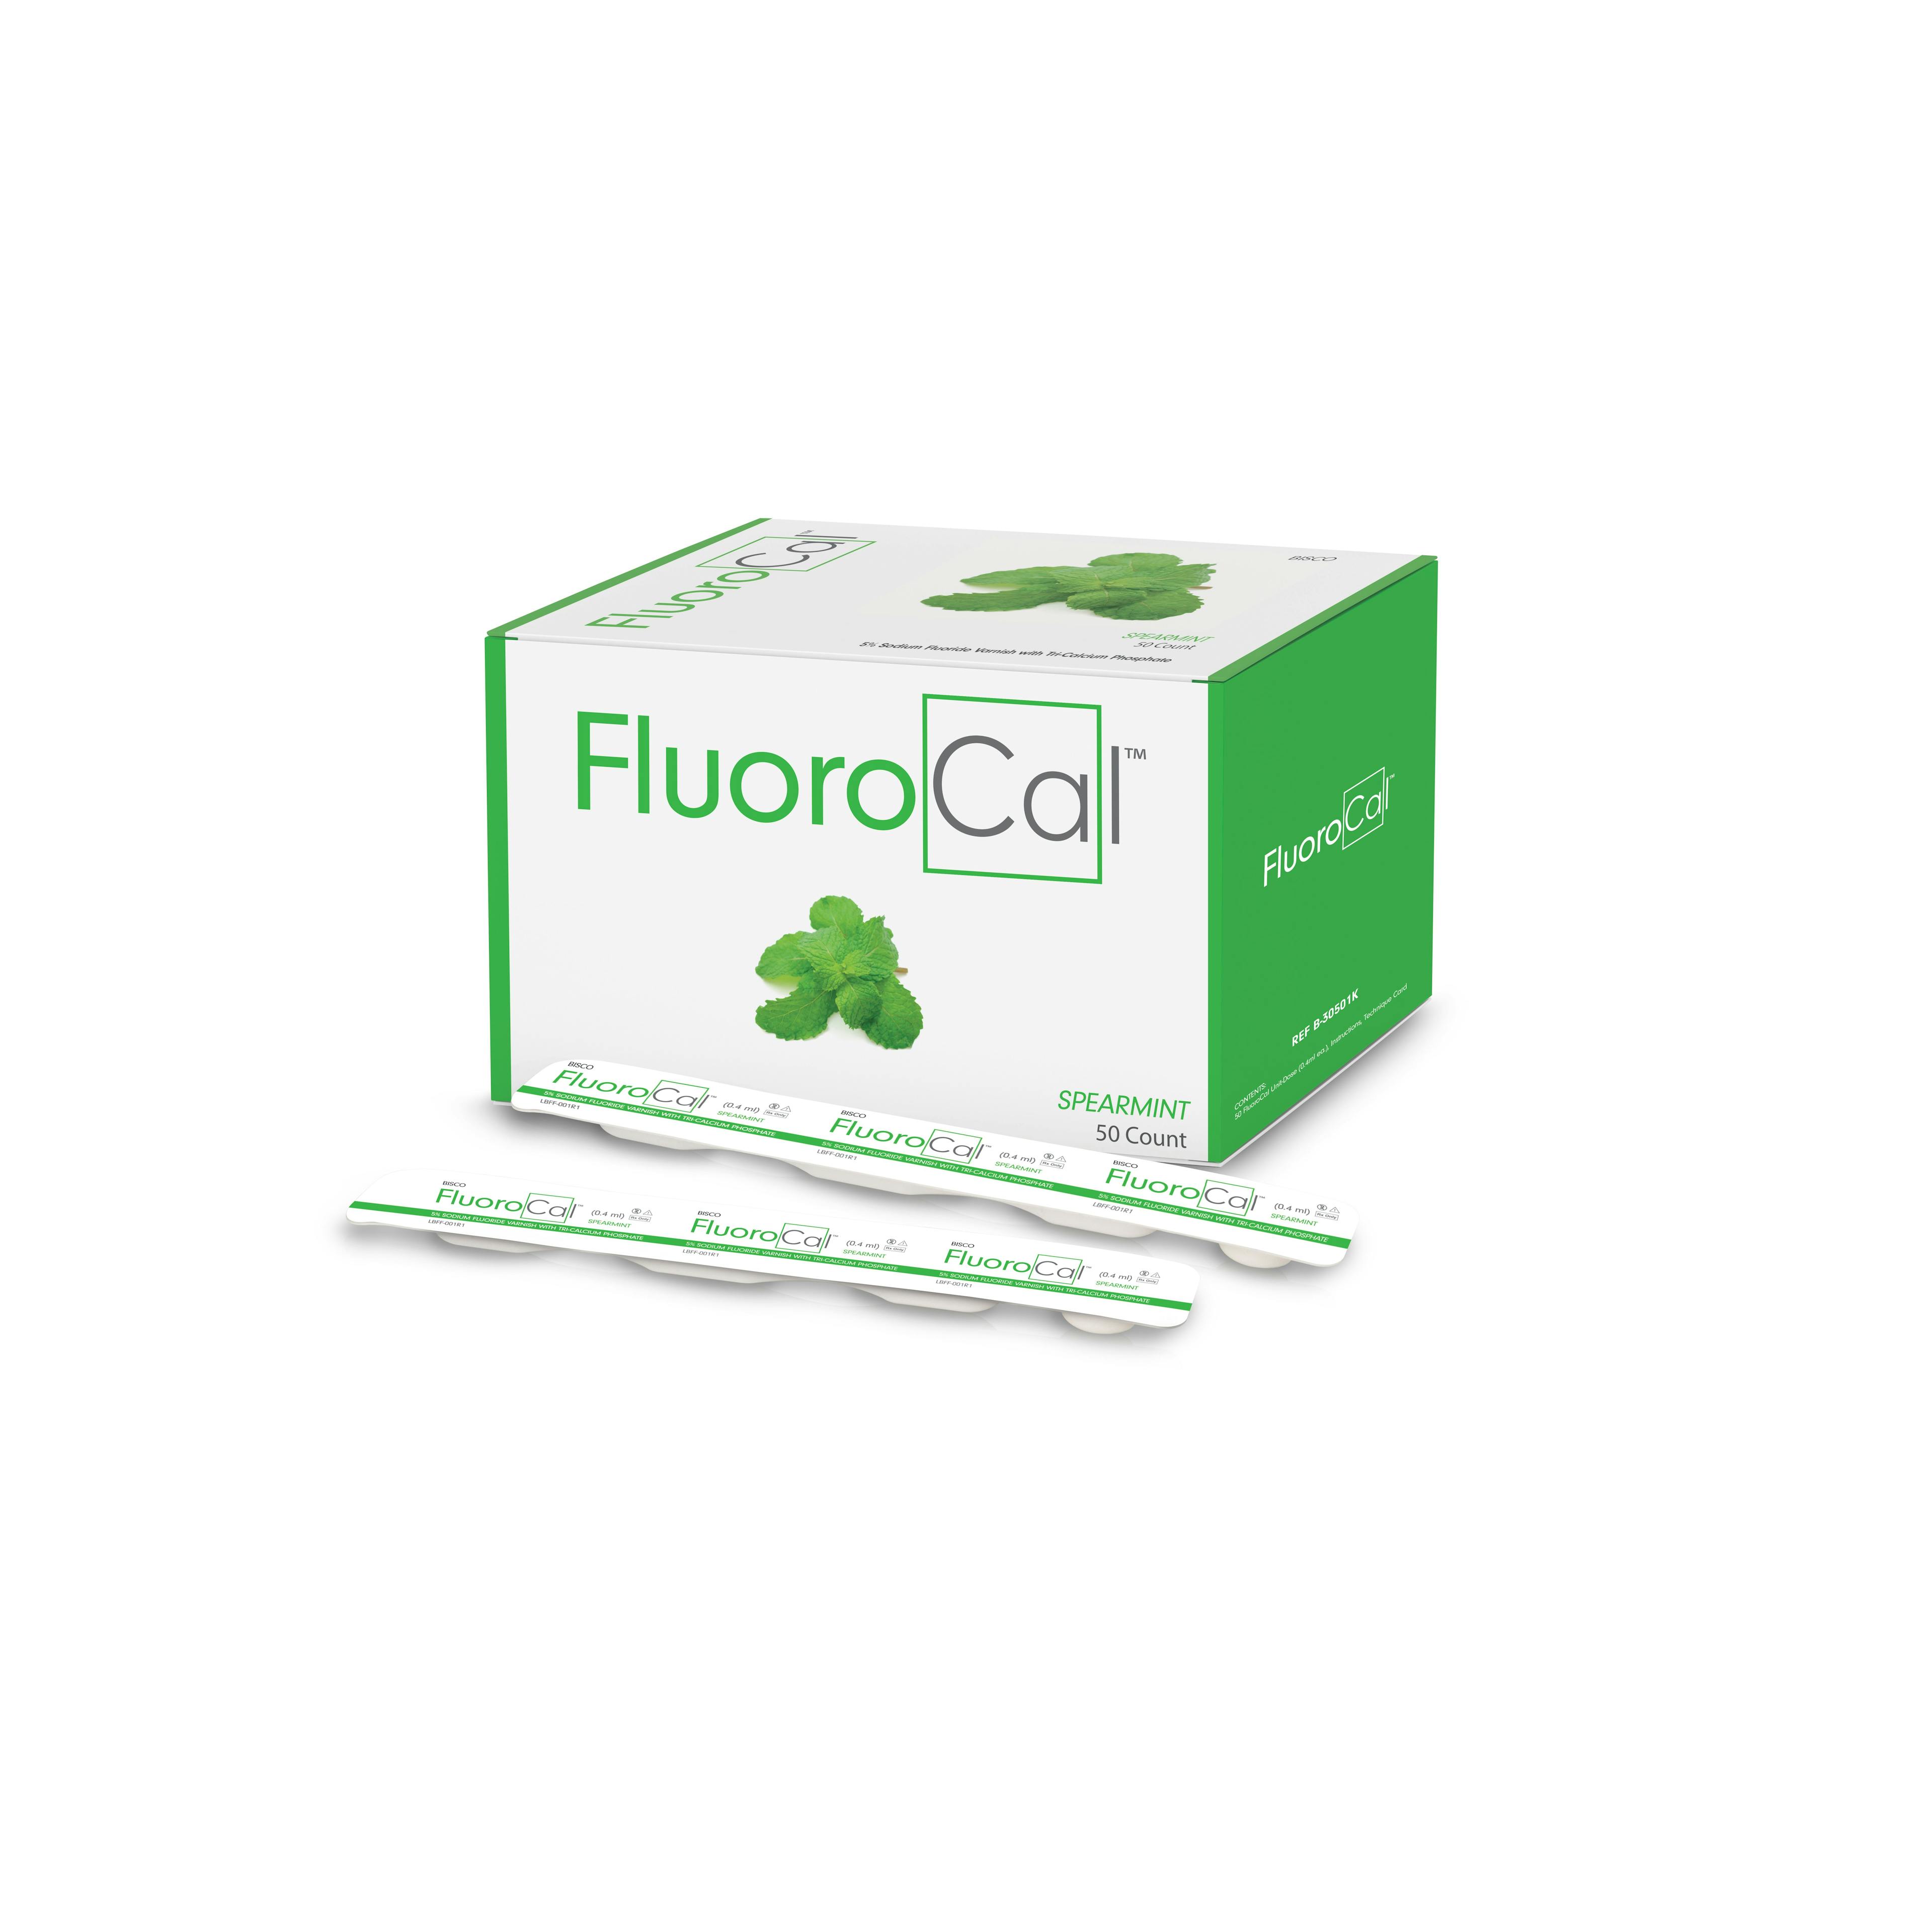 BISCO's FluoroCal